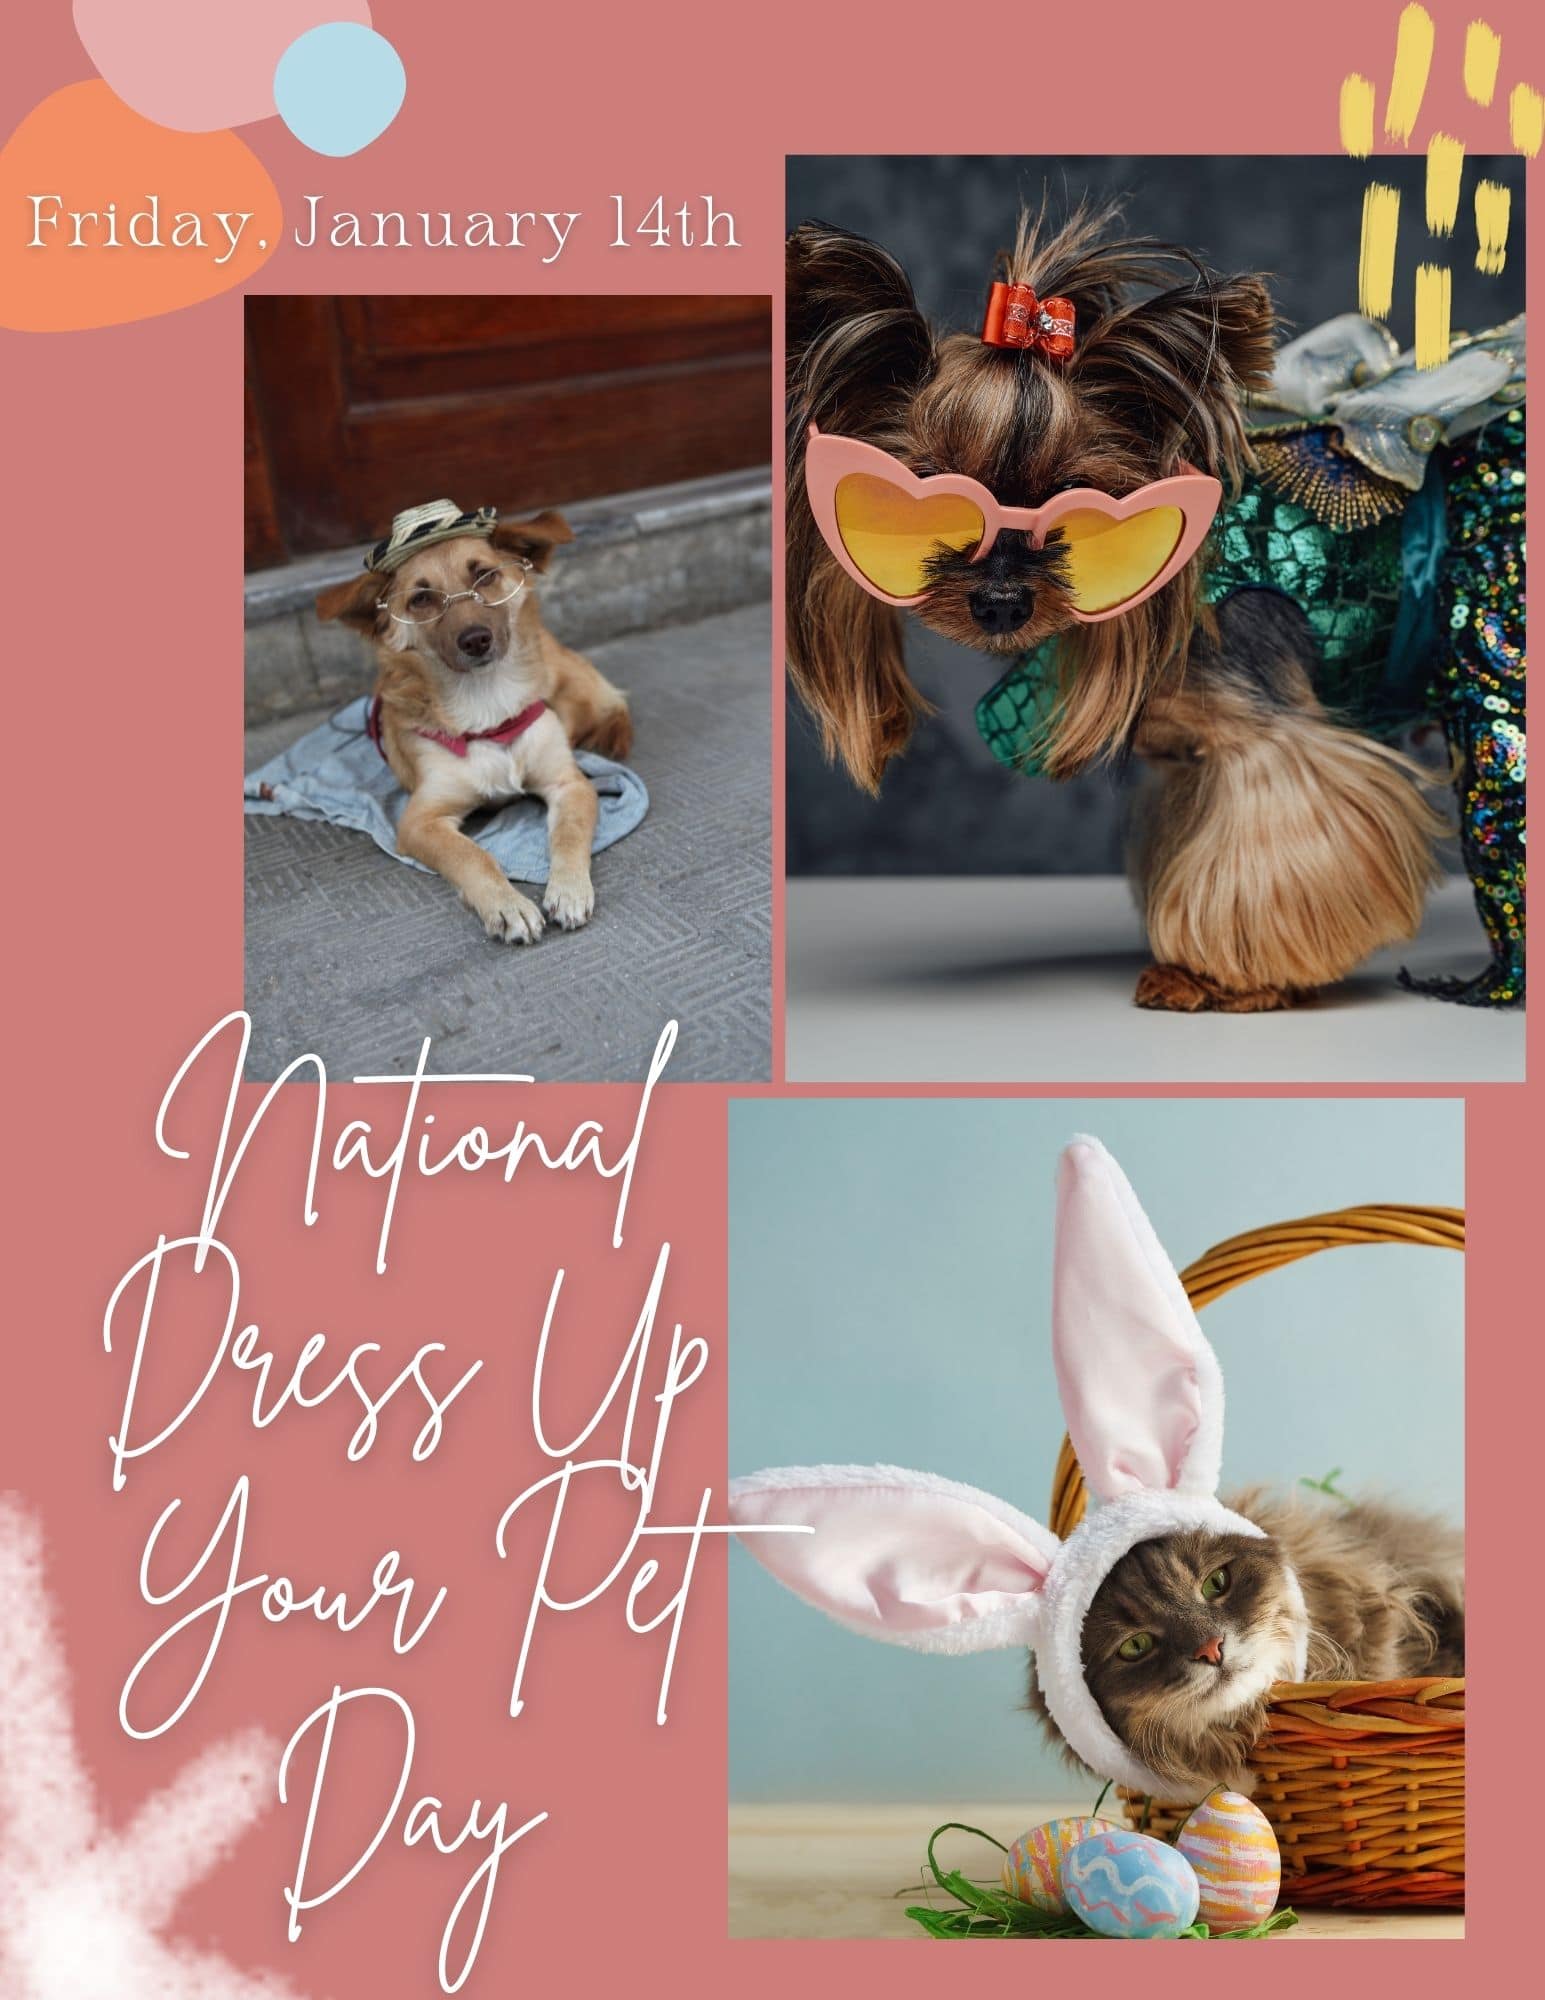 Celebrate National dress up your pet day in Apartments in The Woodlands TX by showcasing your beloved furry companions in adorable outfits.